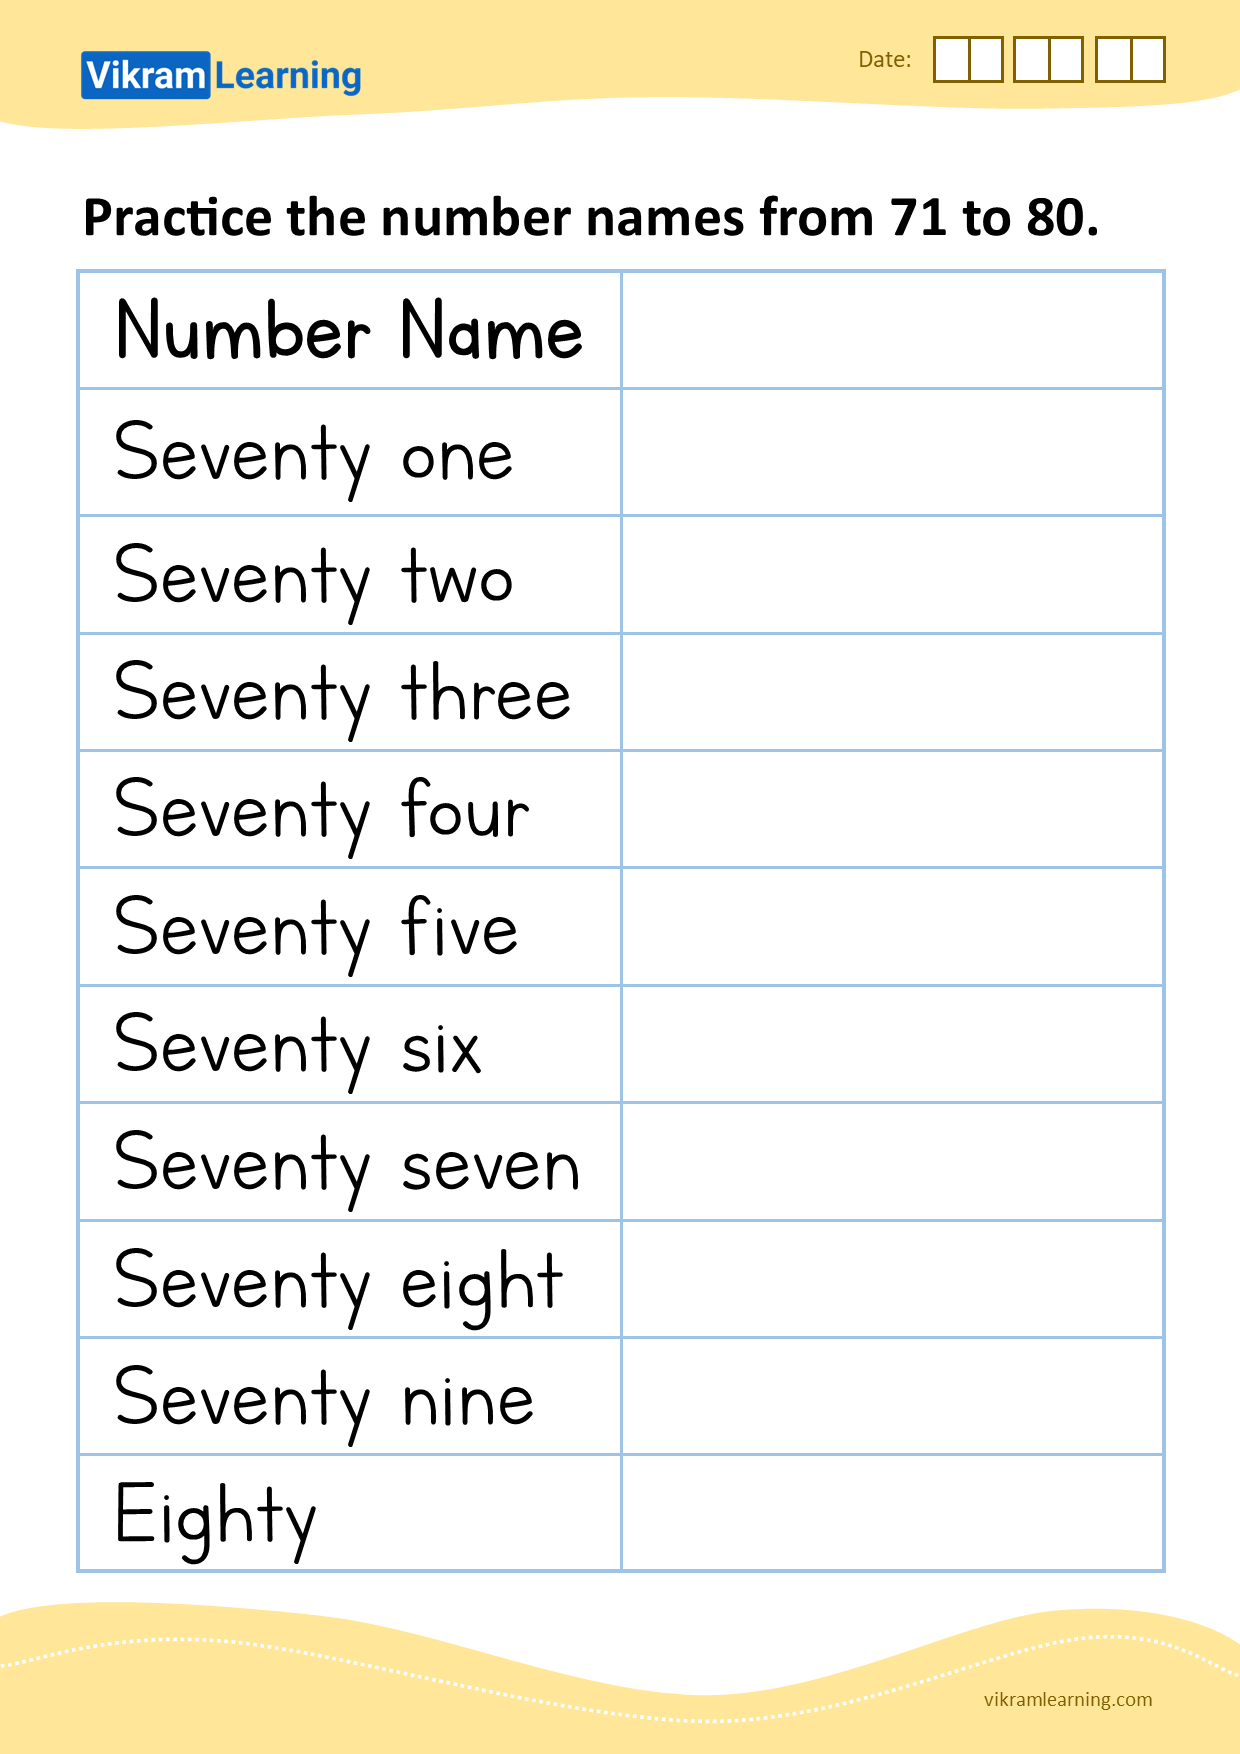 download-practice-the-number-names-from-71-to-80-worksheets